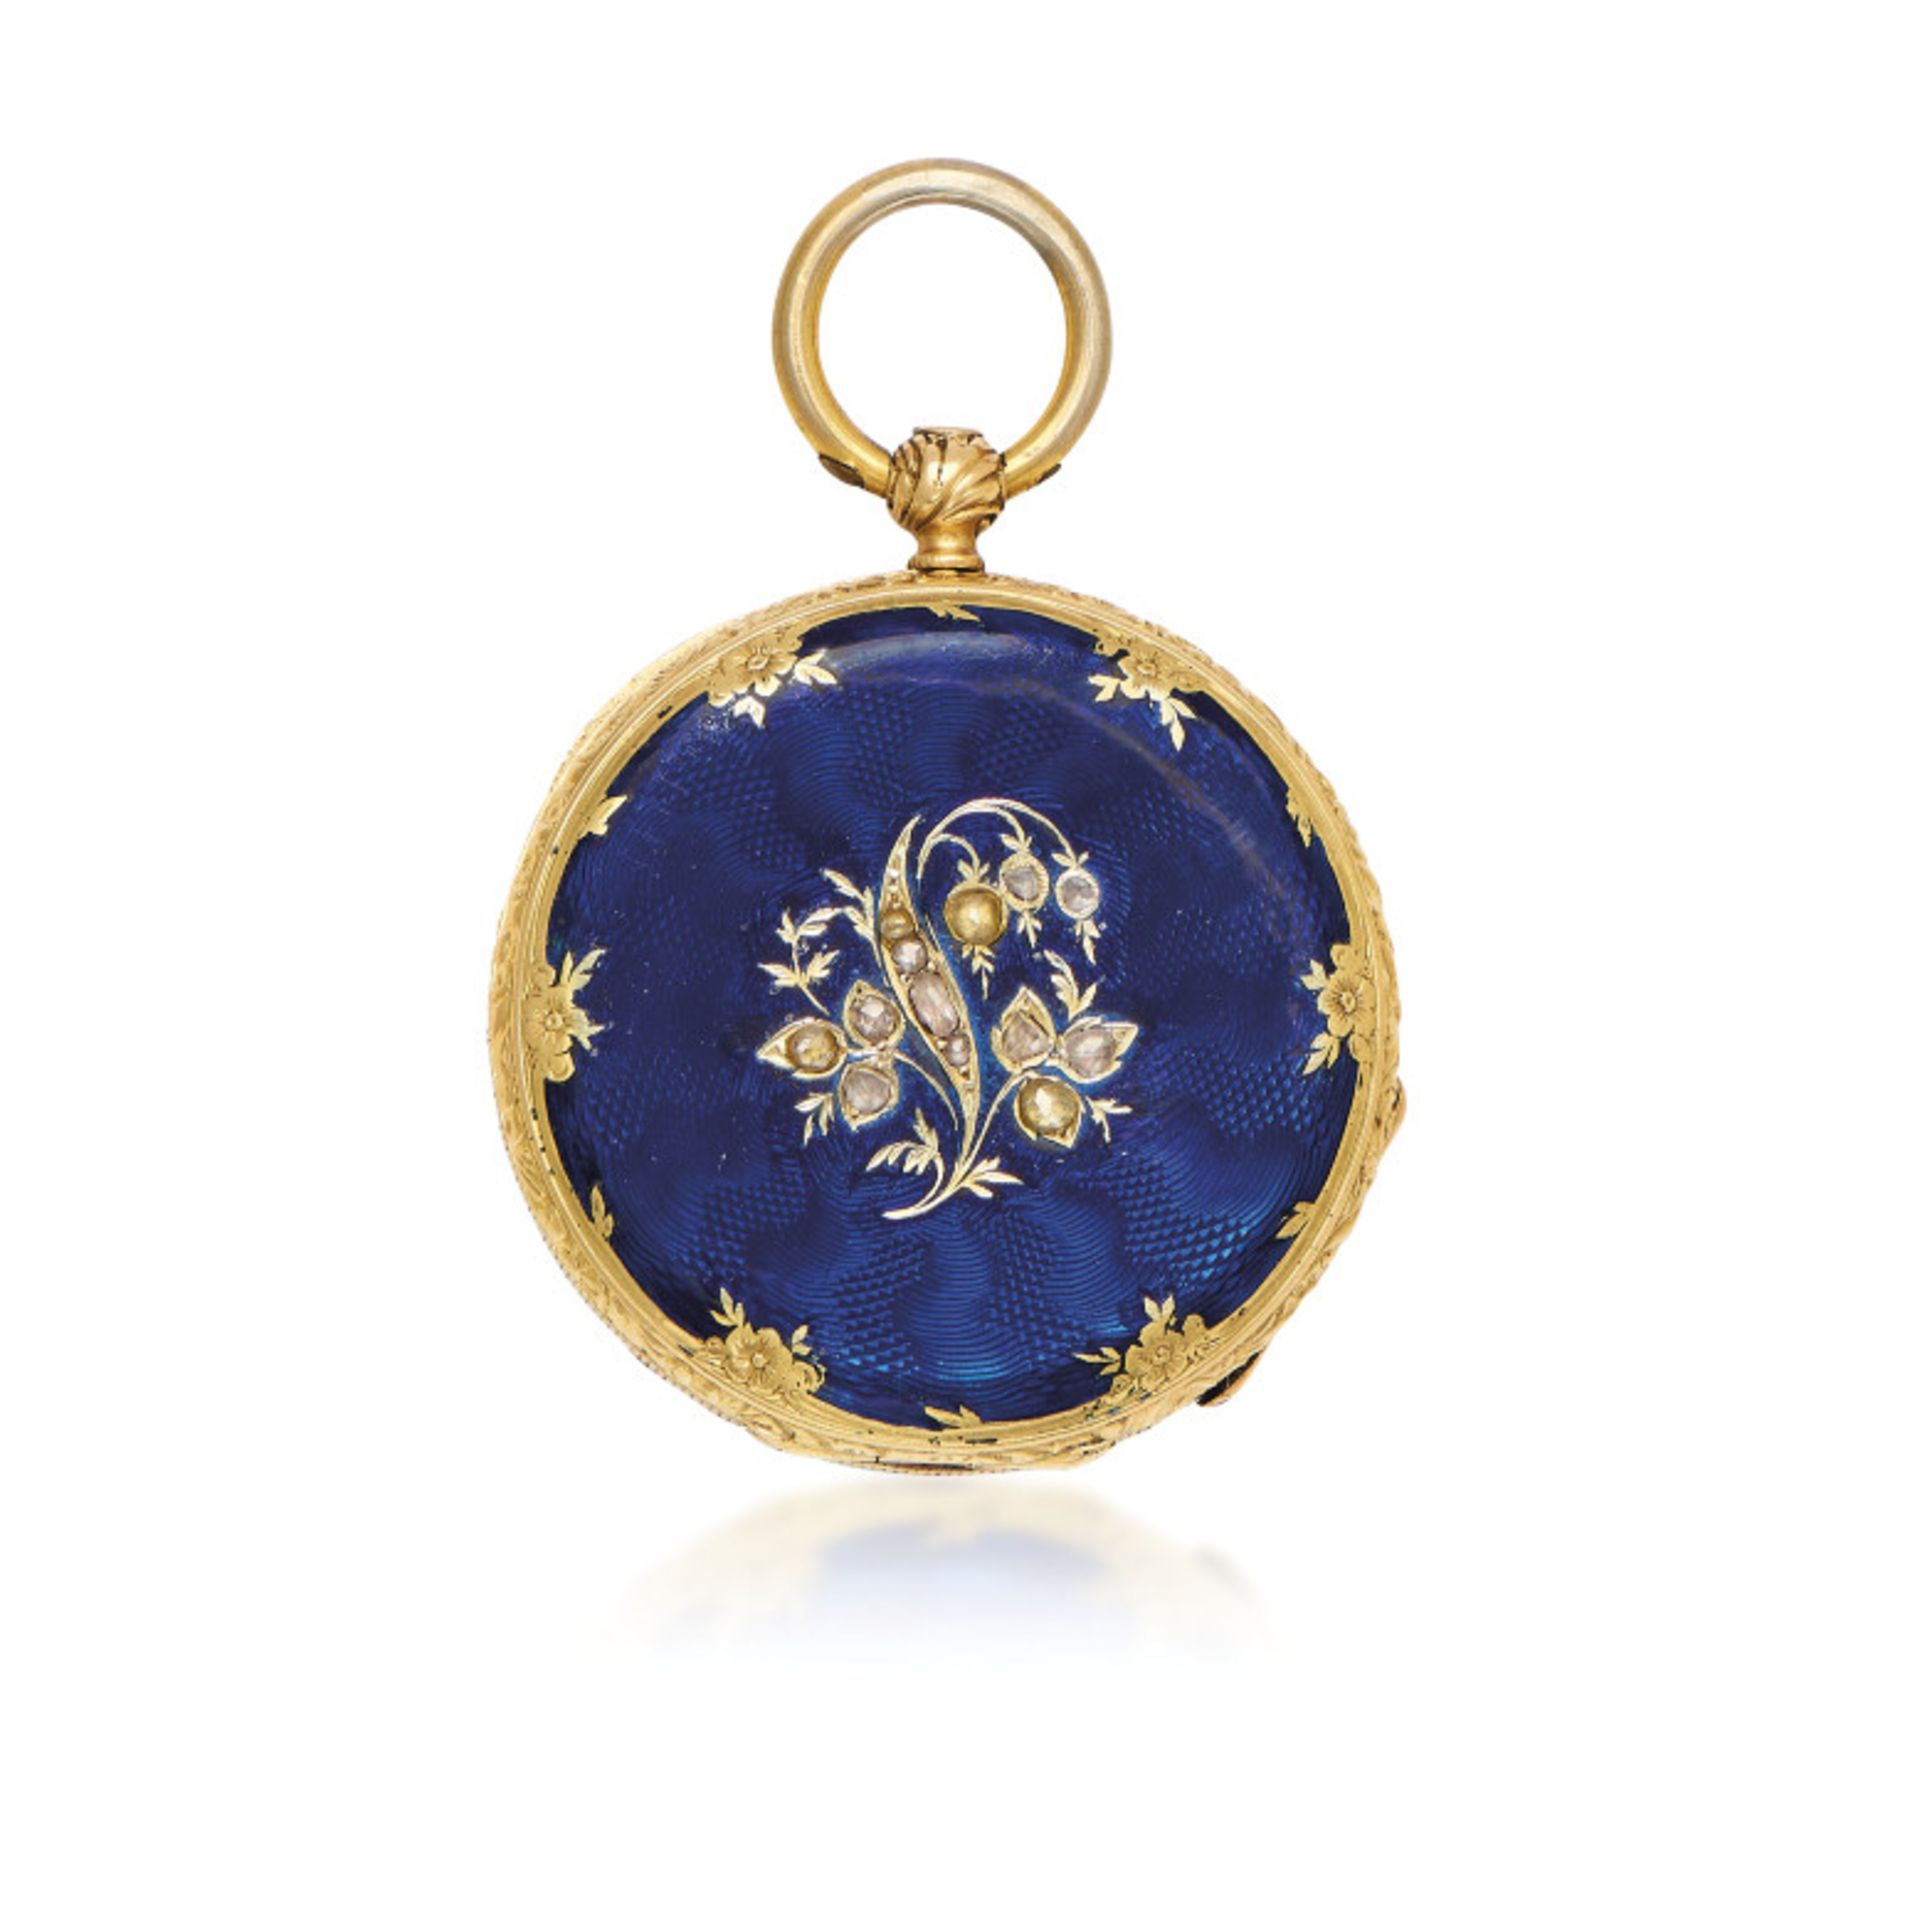 MOULINIE IN GOLD AND ENAMEL, CIRCA 1860 - MOULINIE IN GOLD AND ENAMEL, CIRCA 1860 Case: n. 3129,